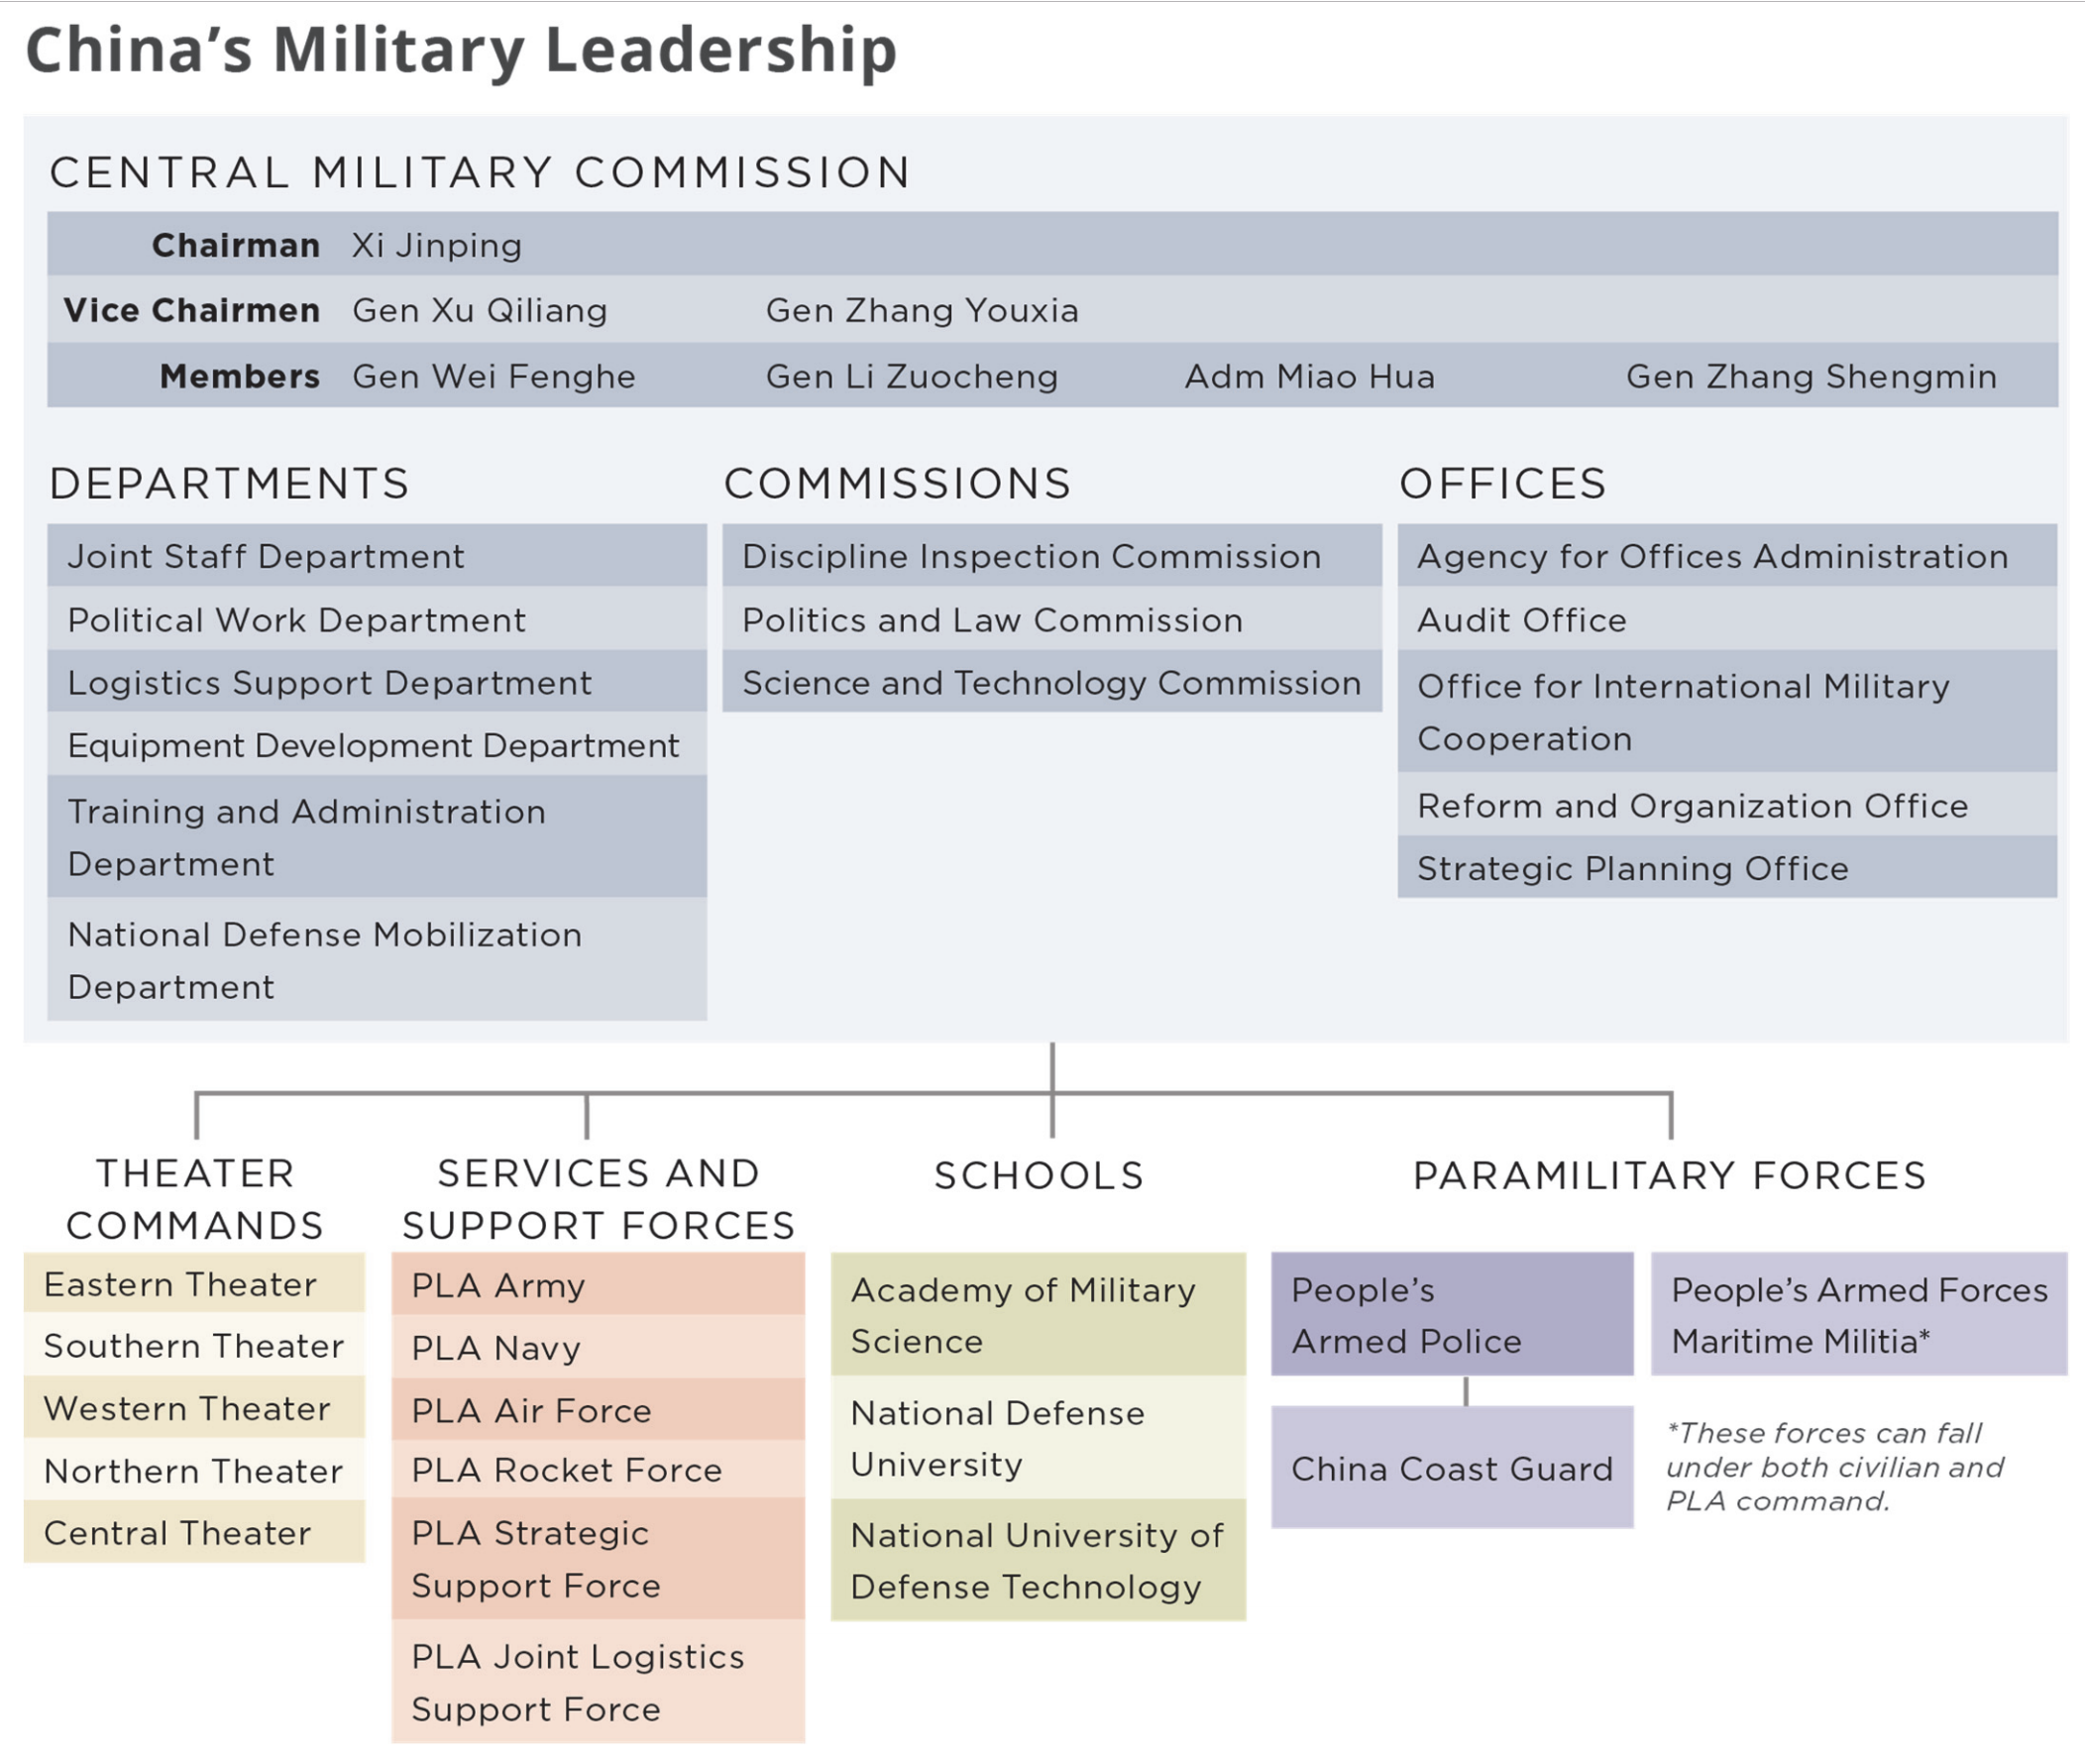 Prc Government Structure Chart